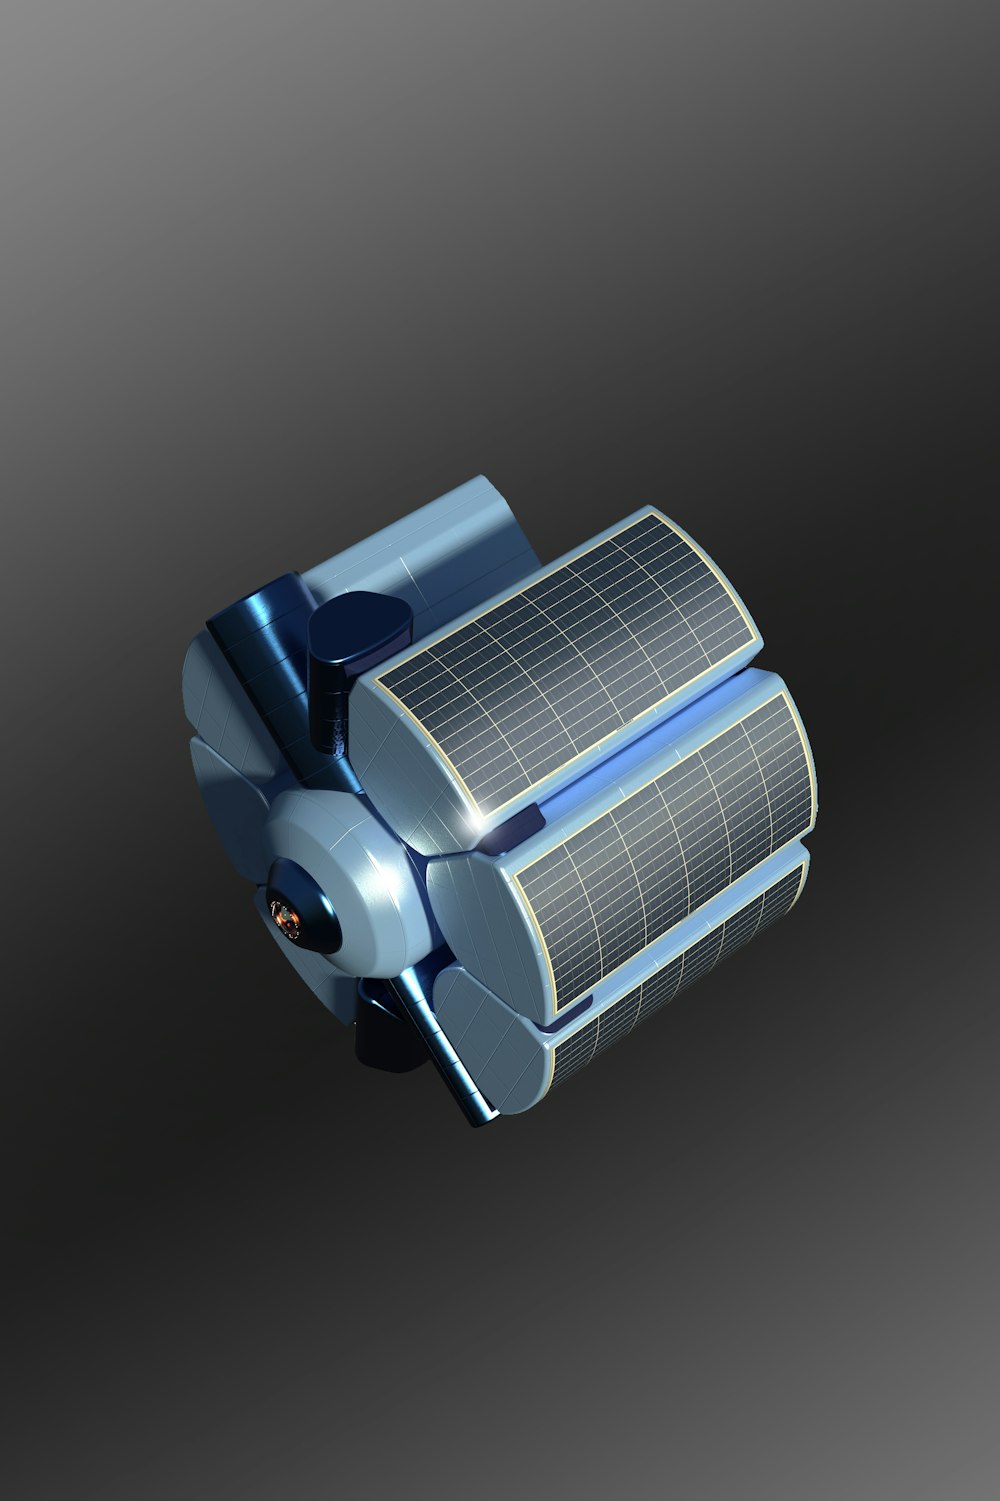 a solar powered object on a gray background